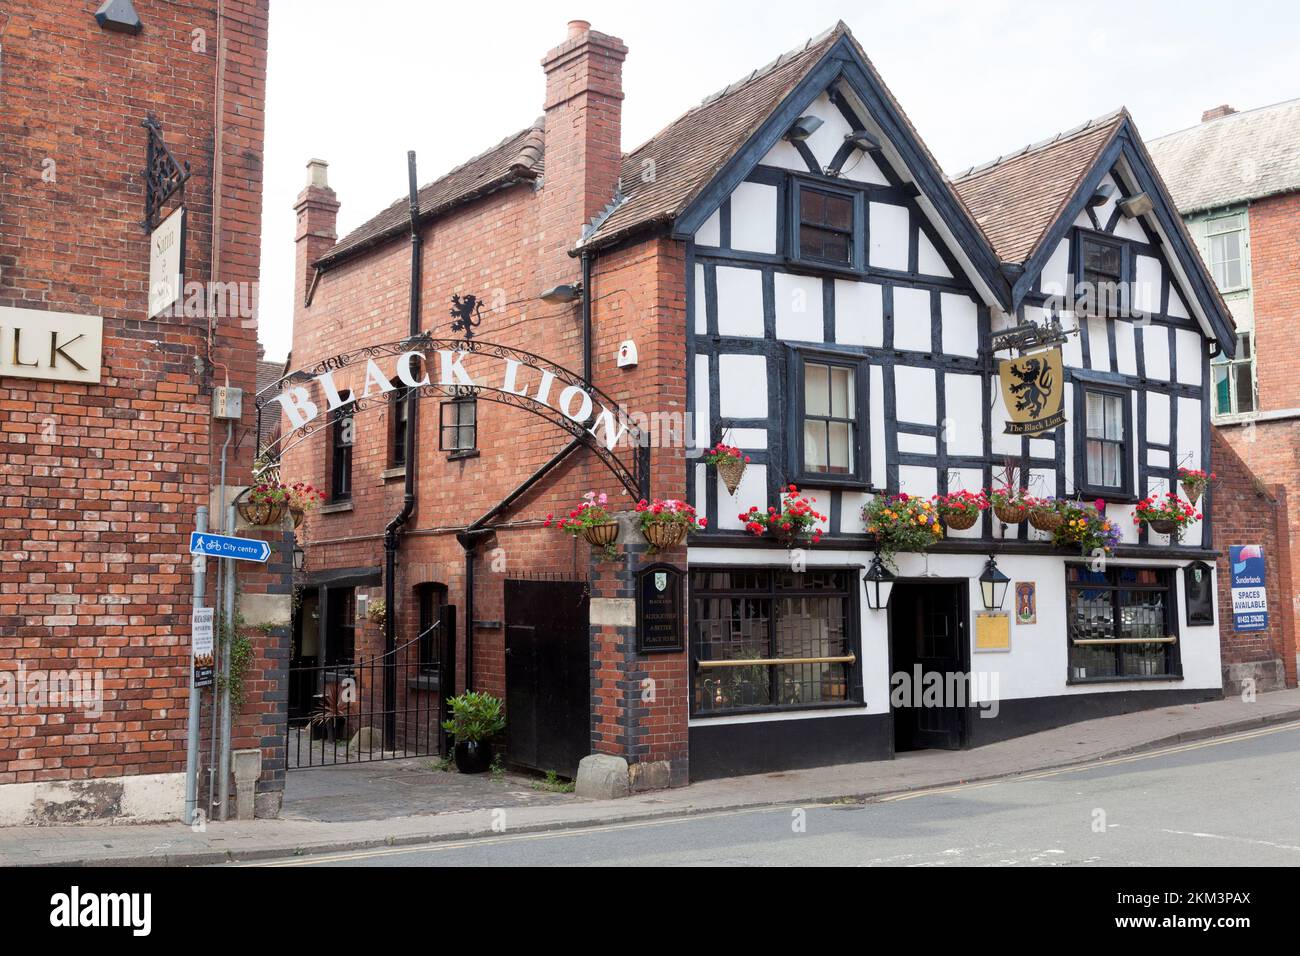 The 'Black Lion' pub, Hereford, Herefordshire Stock Photo